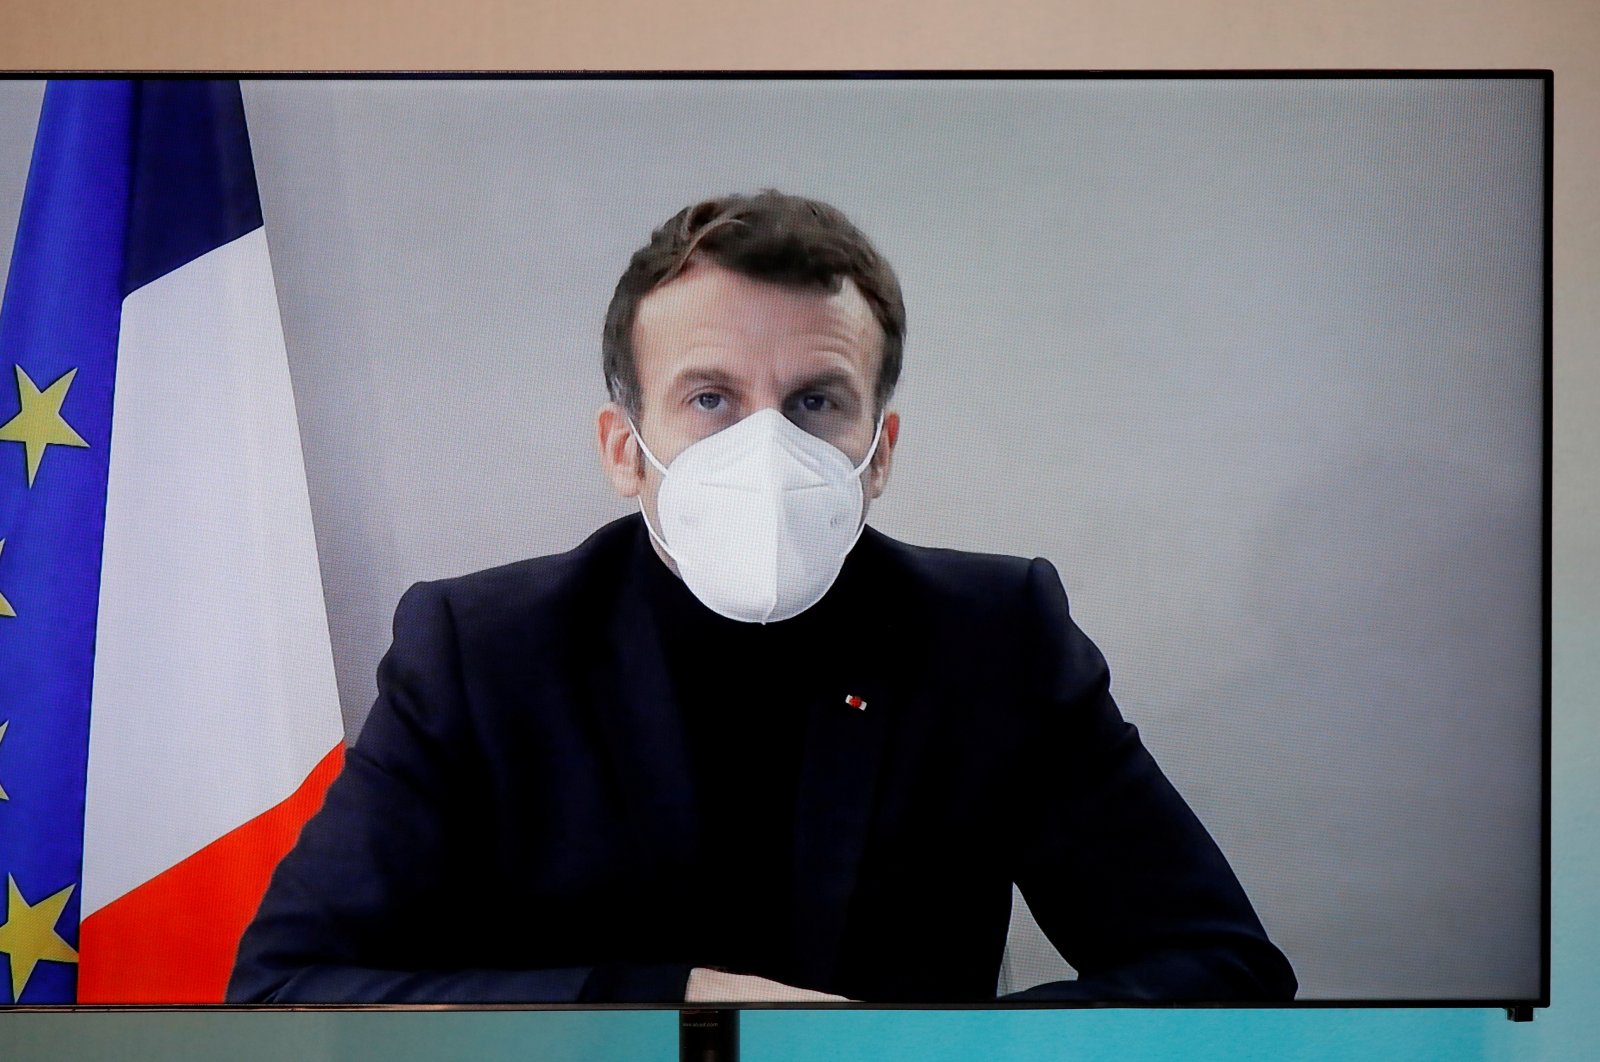 French President Emmanuel Macron on a screen as he attends a conference round table via videoconference in Paris, France, Dec. 17, 2020. (Reuters Photo)